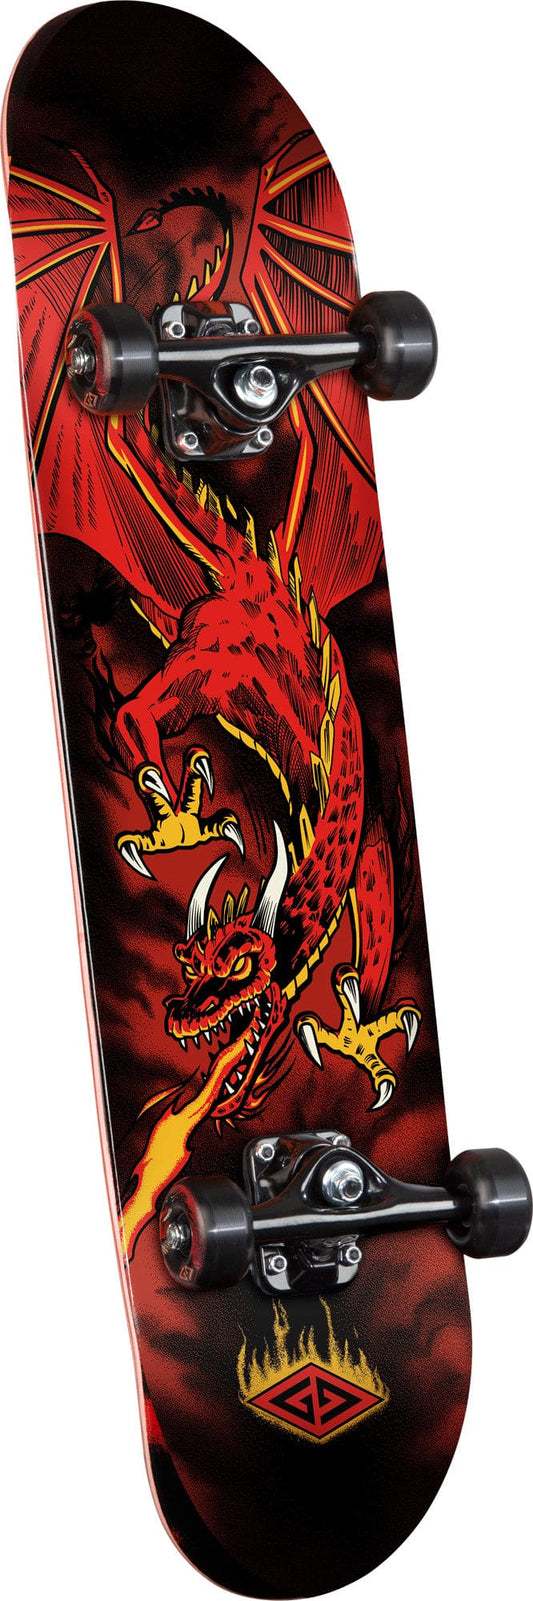 Powell Peralta | 7.625" Flying Dragon Complete